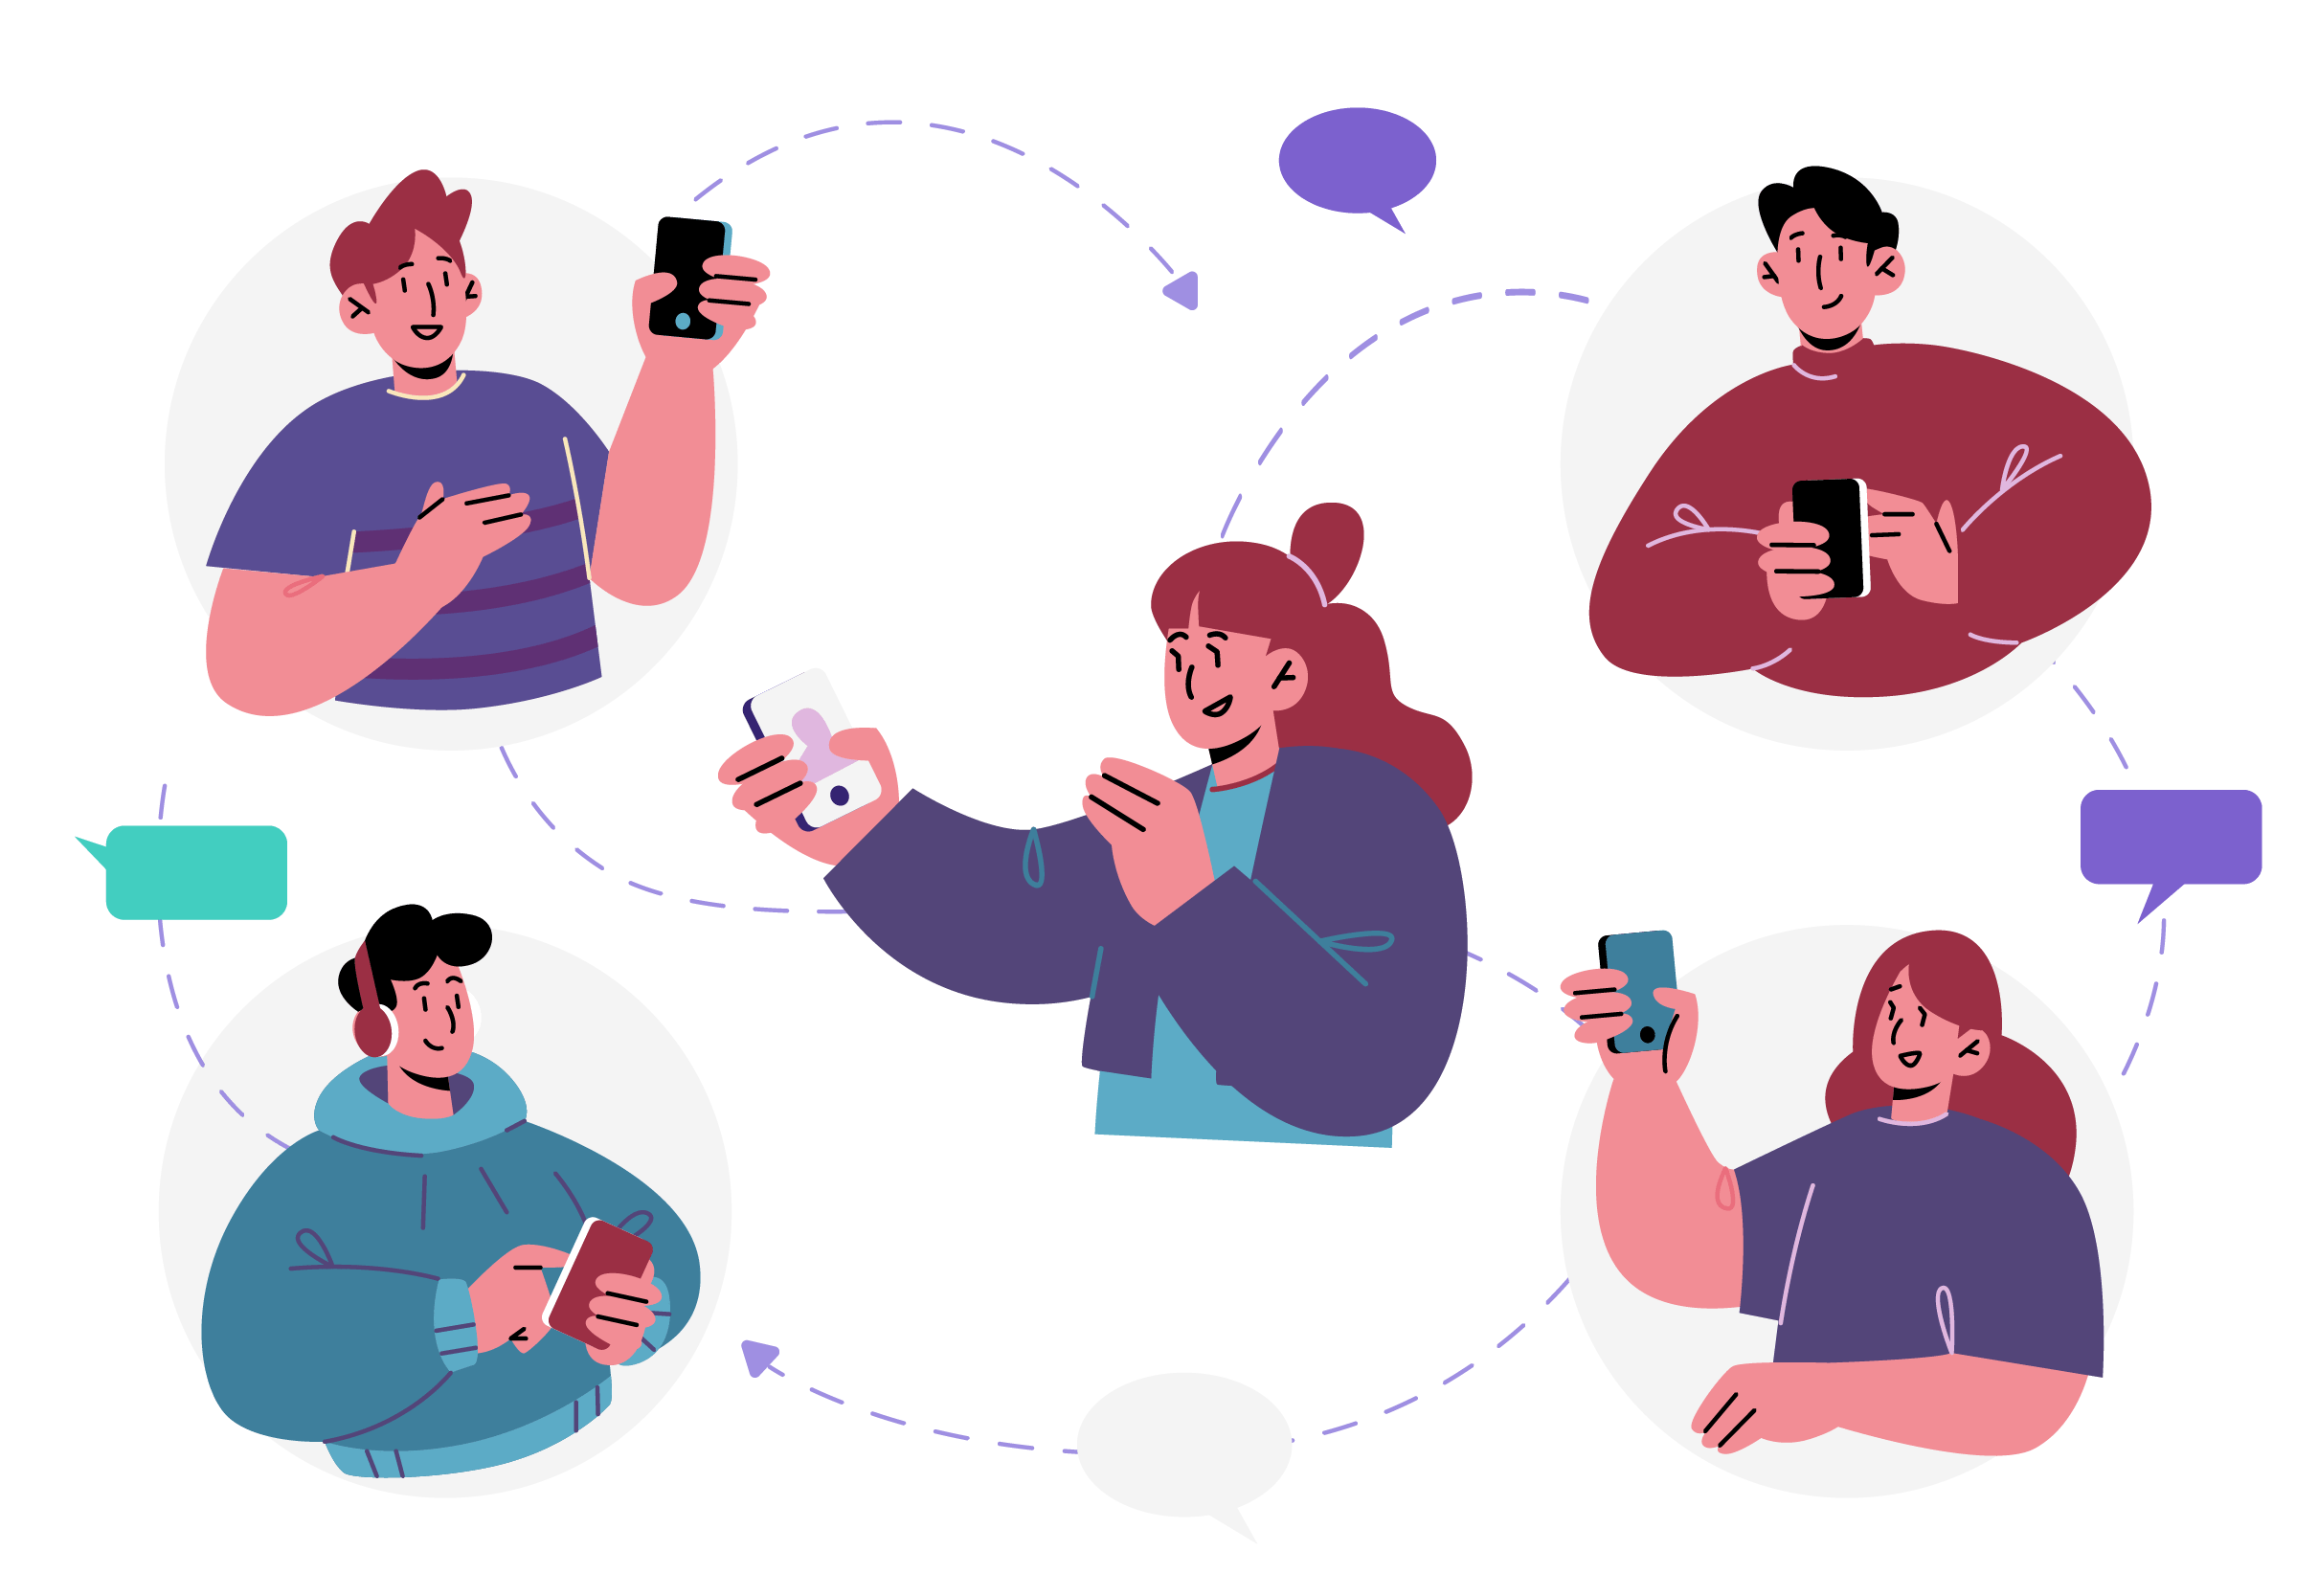 illustration of people messaging on chat apps